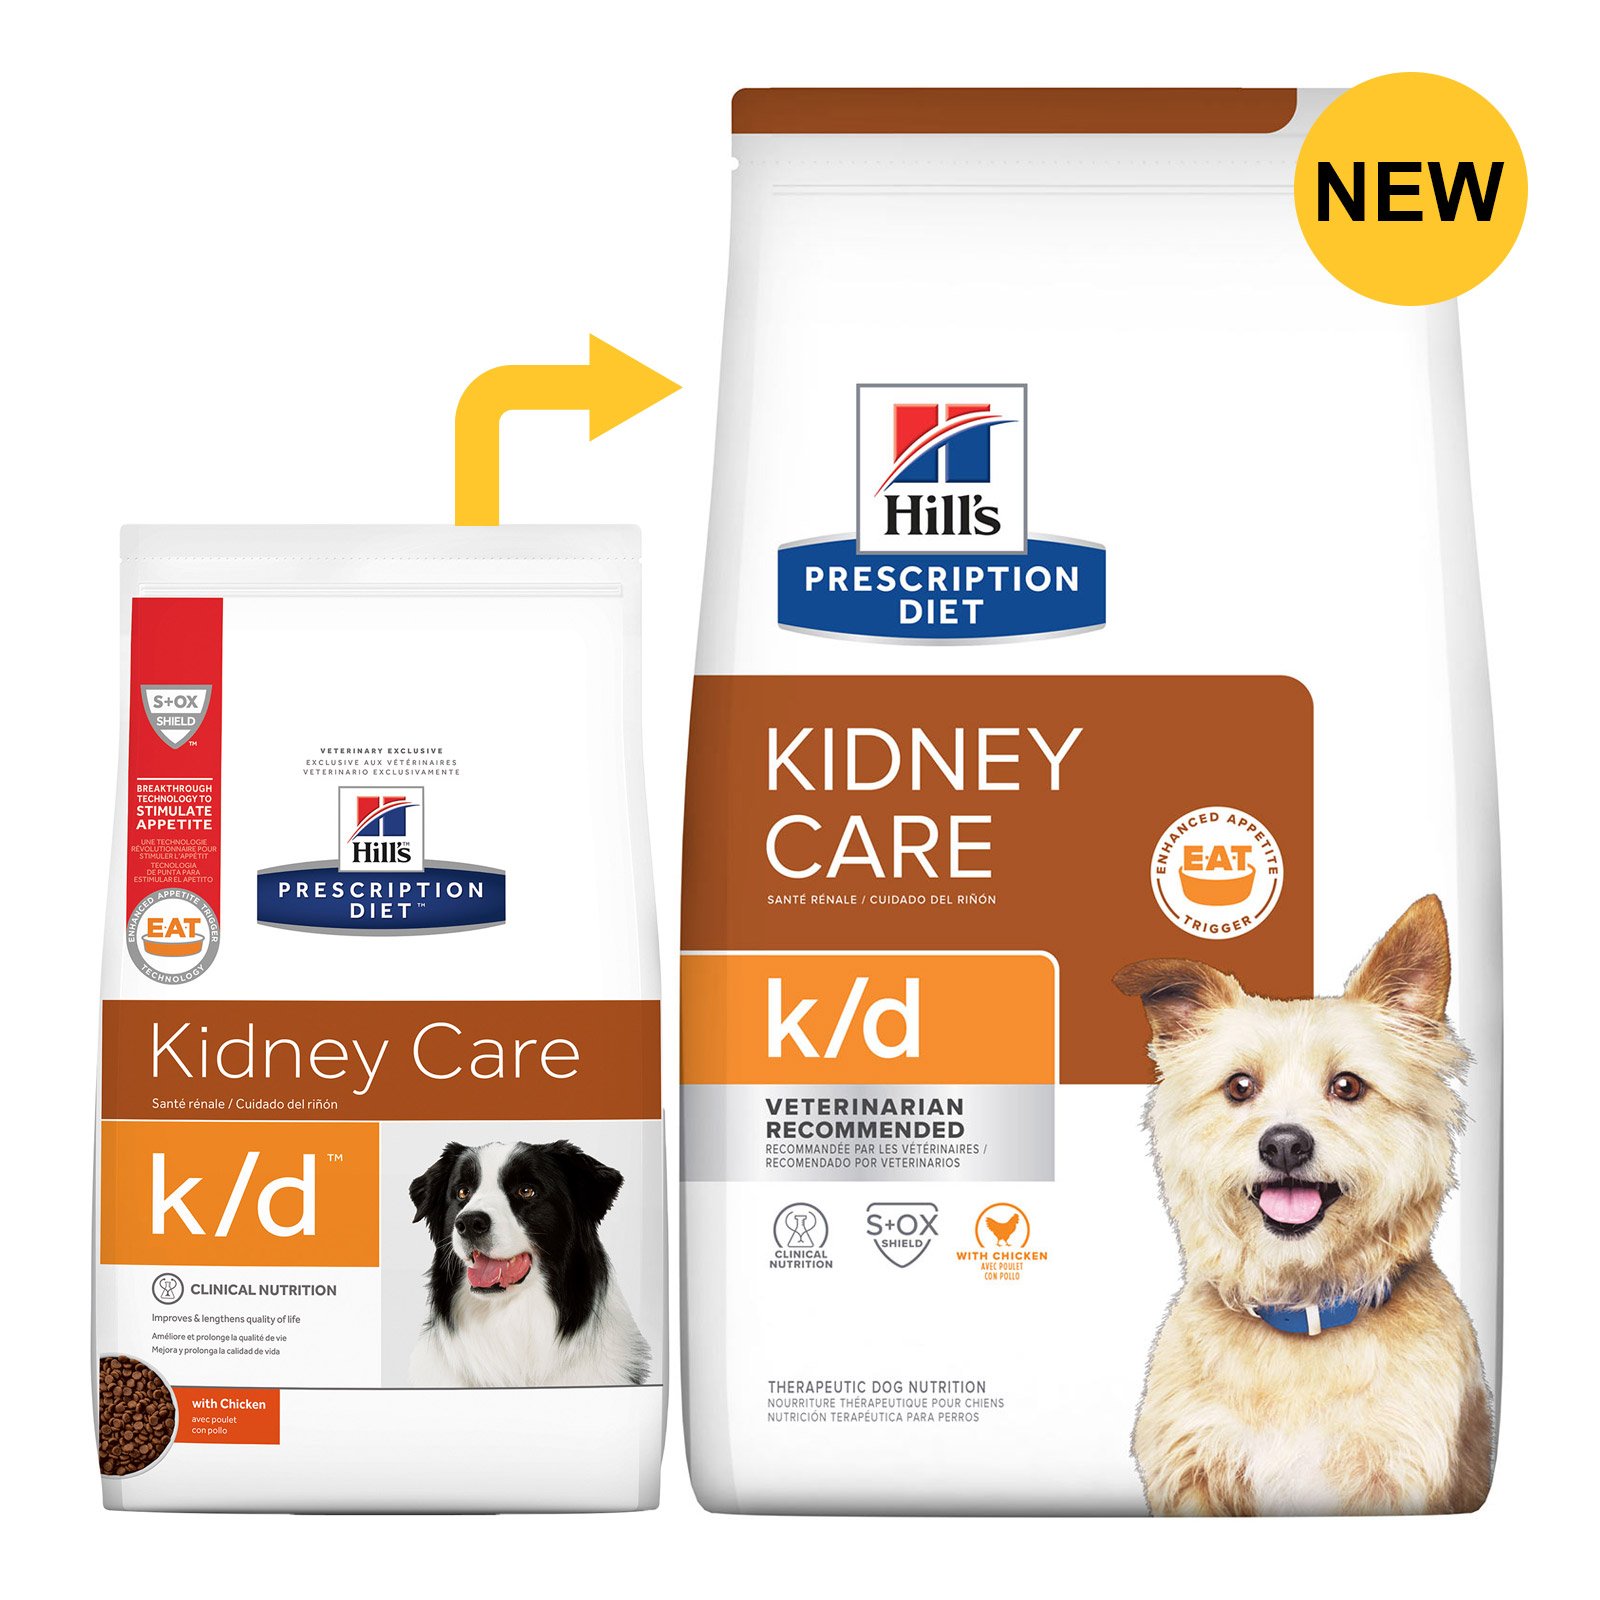 Hill's Prescription Diet k/d Kidney Care with Chicken Dry Dog Food 